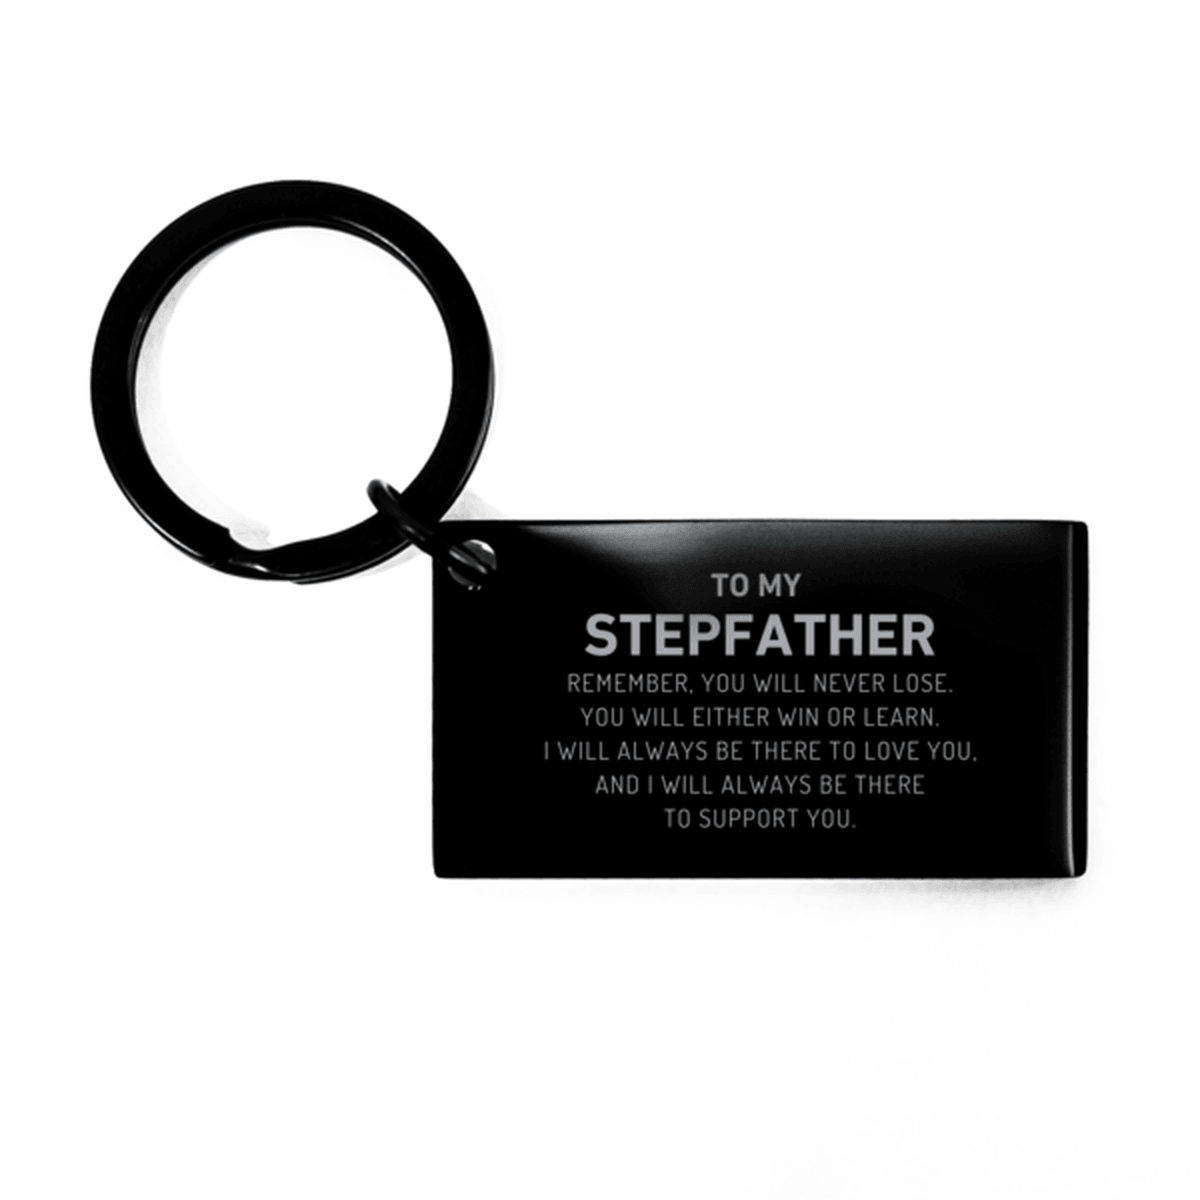 Stepfather Gifts, To My Stepfather Remember, you will never lose. You will either WIN or LEARN, Keepsake Keychain For Stepfather Engraved, Birthday Christmas Gifts Ideas For Stepfather X-mas Gifts